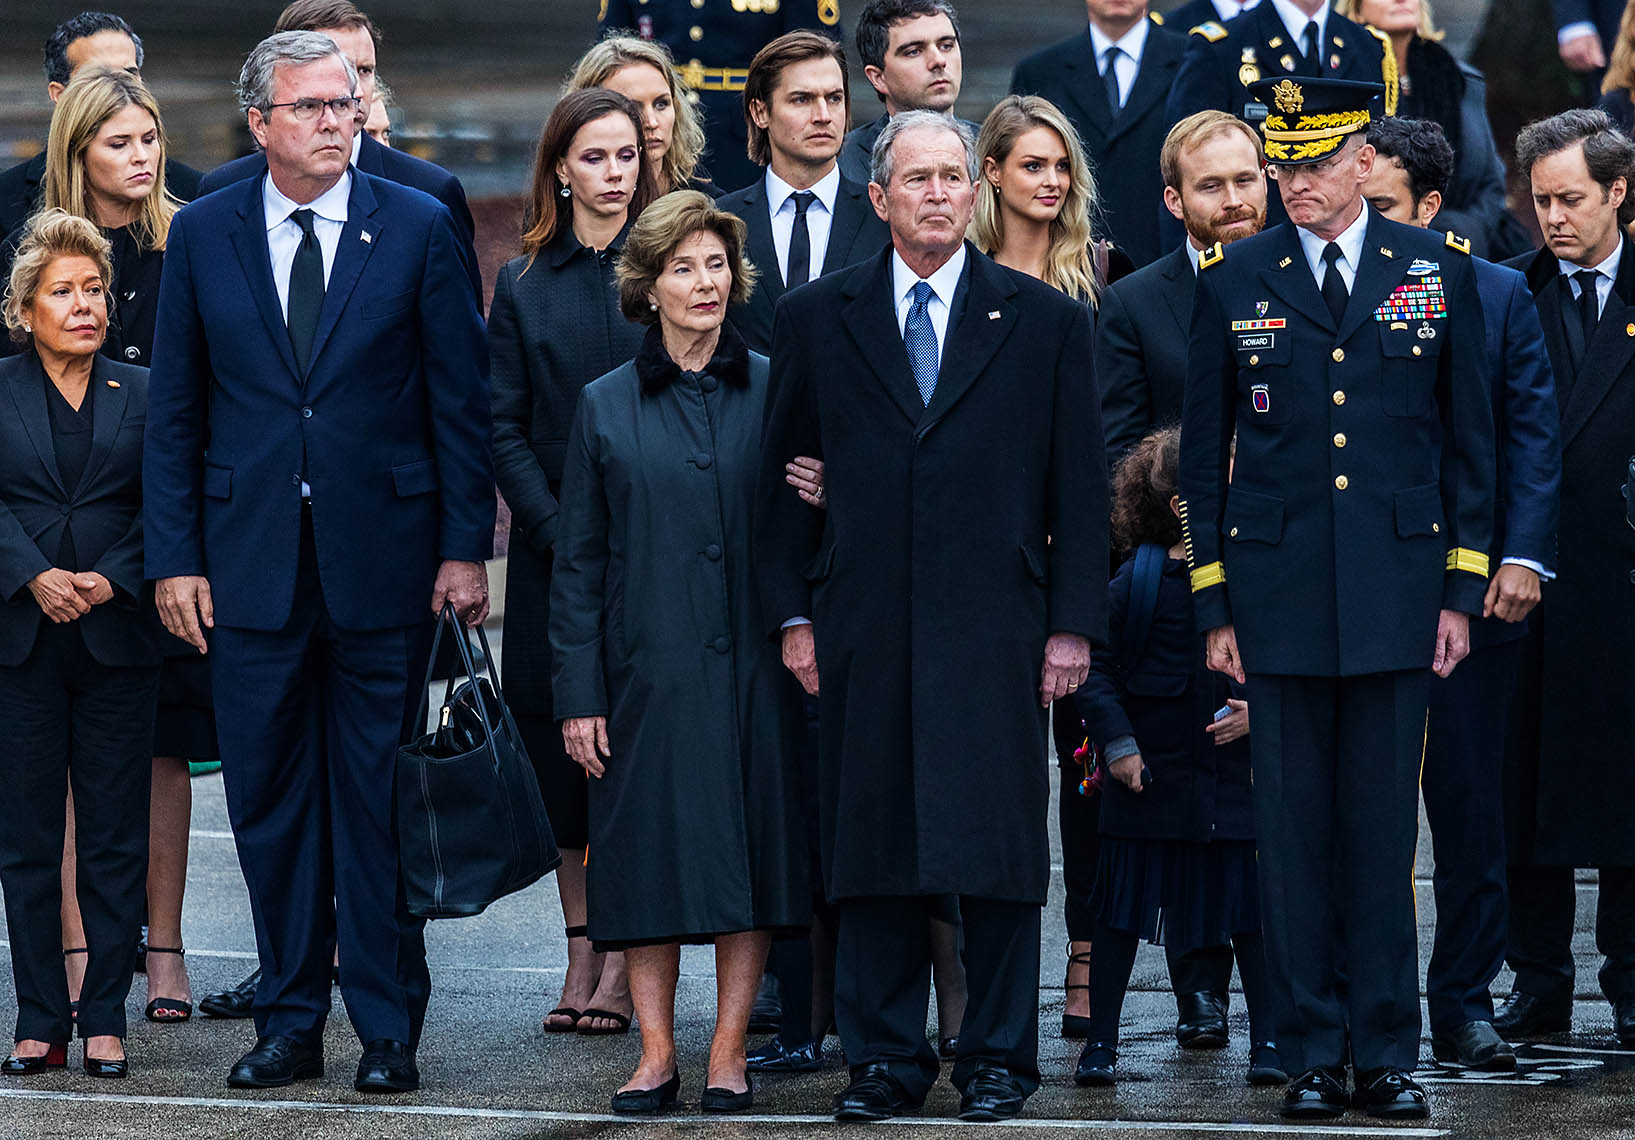 Bush Family at  George H. W. Bush funeral at Texas A&M  by Scott Dobry Pictures photographer in Omaha, Nebraska